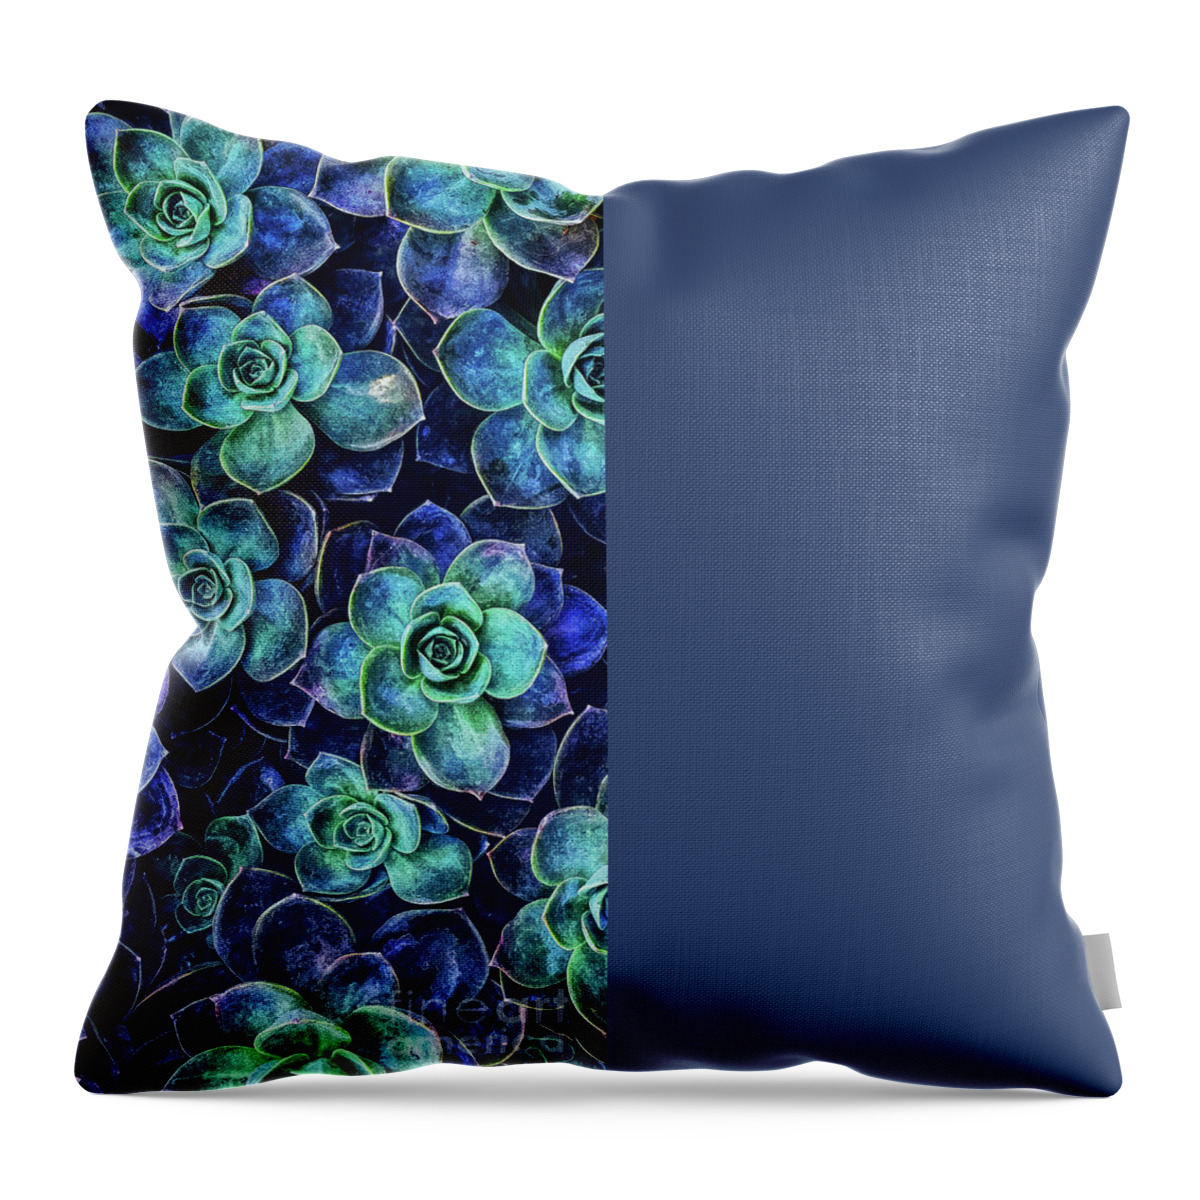 Blue Throw Pillow featuring the digital art Blue And Green Abstract Art by Phil Perkins